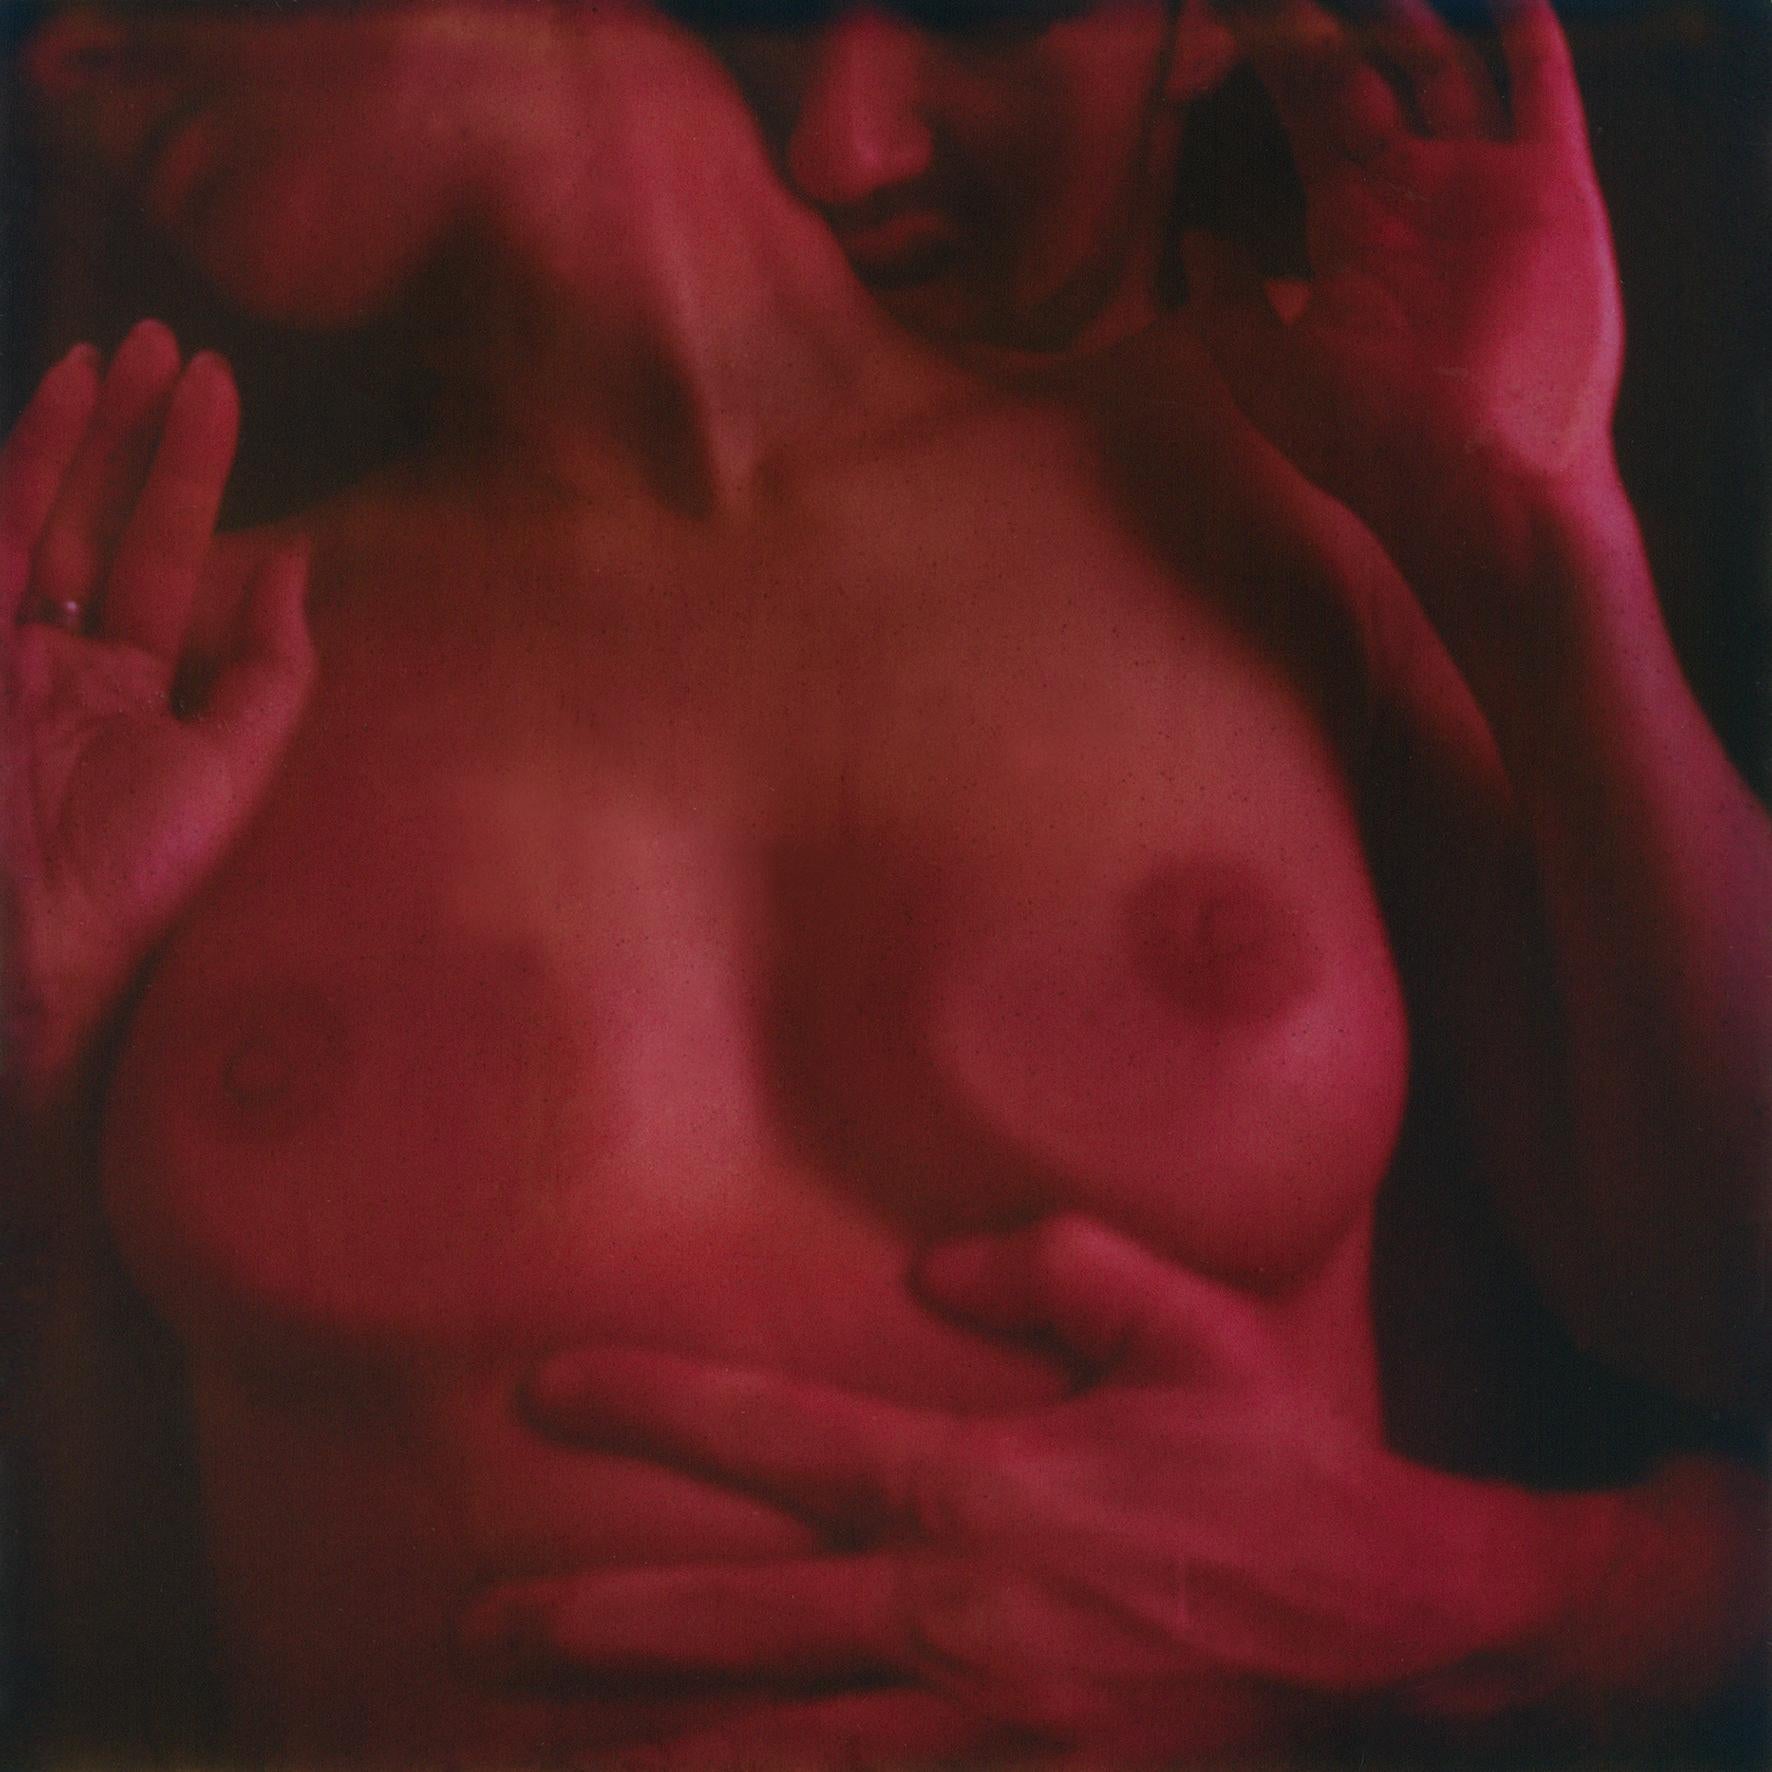 Case 47 #08, 2006 [From the series Le Fan d’O] - Polaroid, Nude, Women, Color